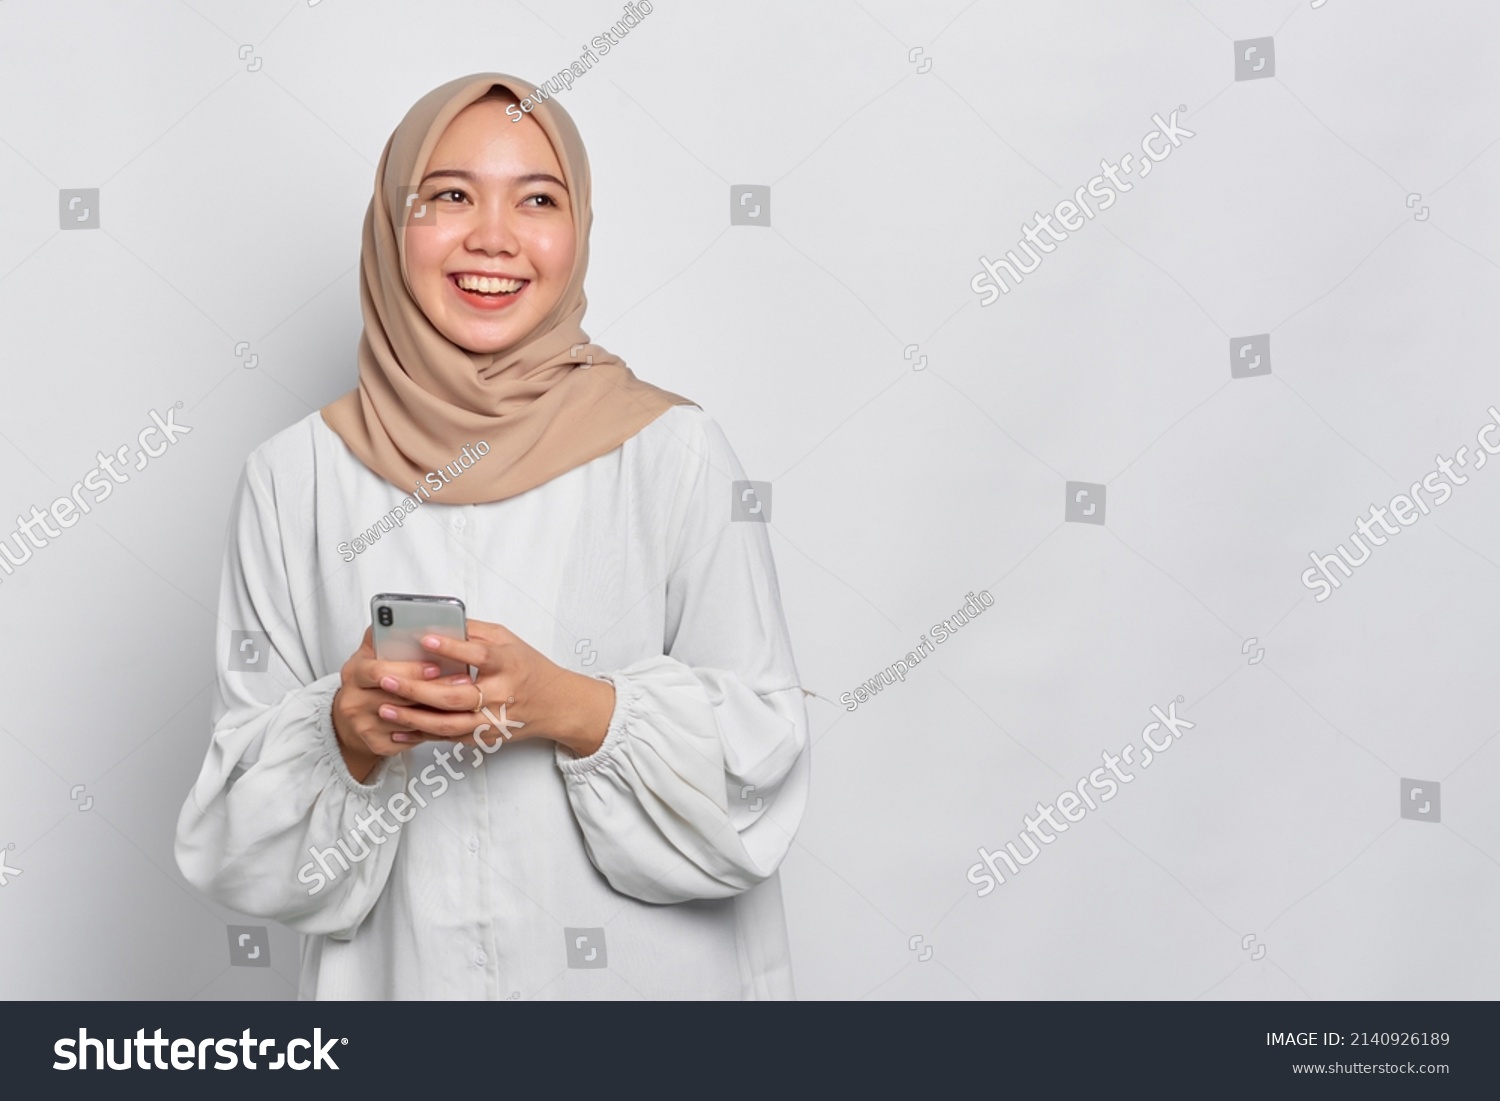 Smiling young Asian Muslim woman using a mobile phone and looking away isolated over white background #2140926189